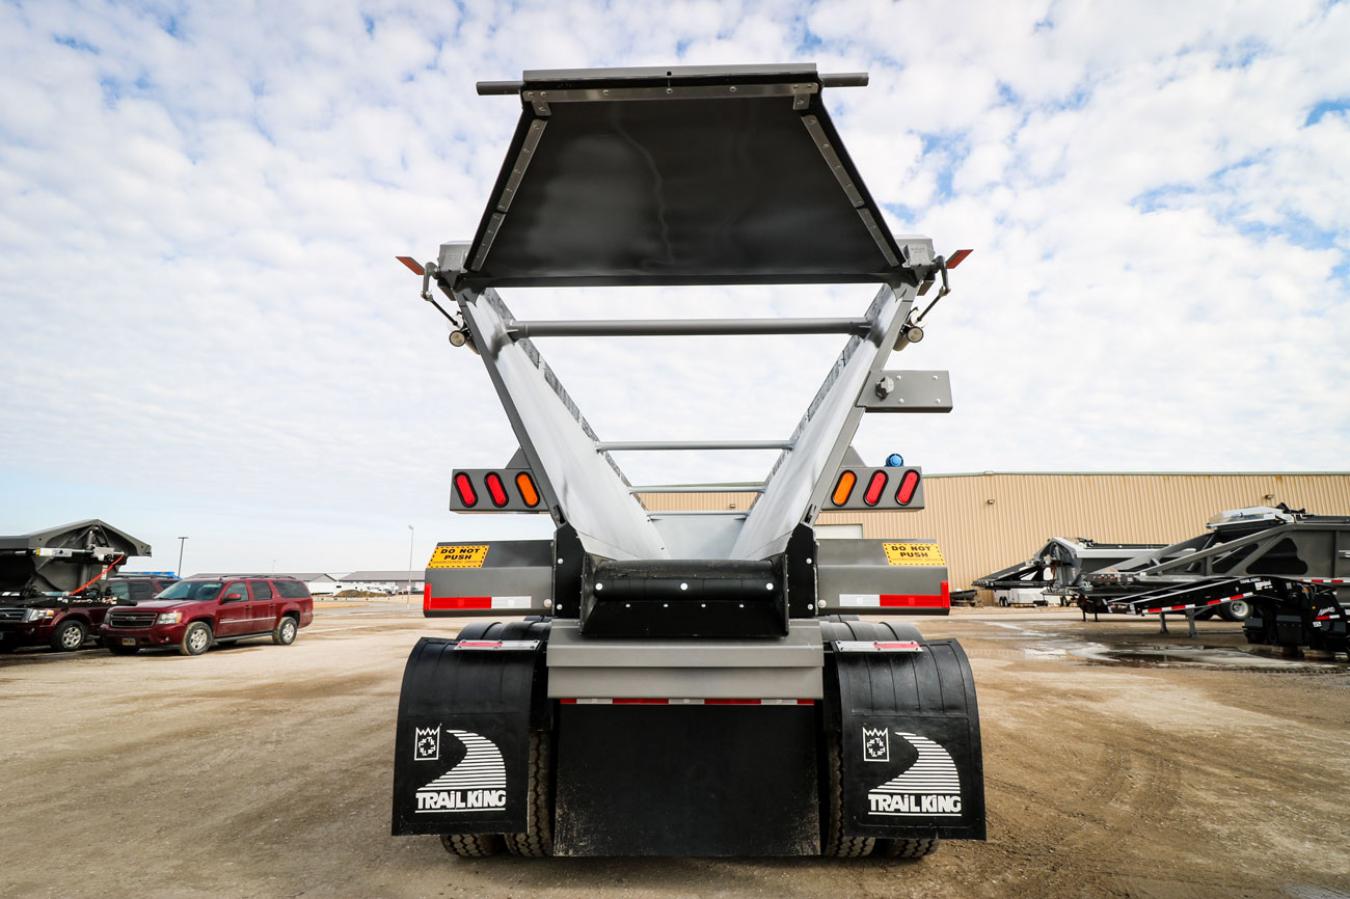 An exterior shot of the back of a Trail King Trailer